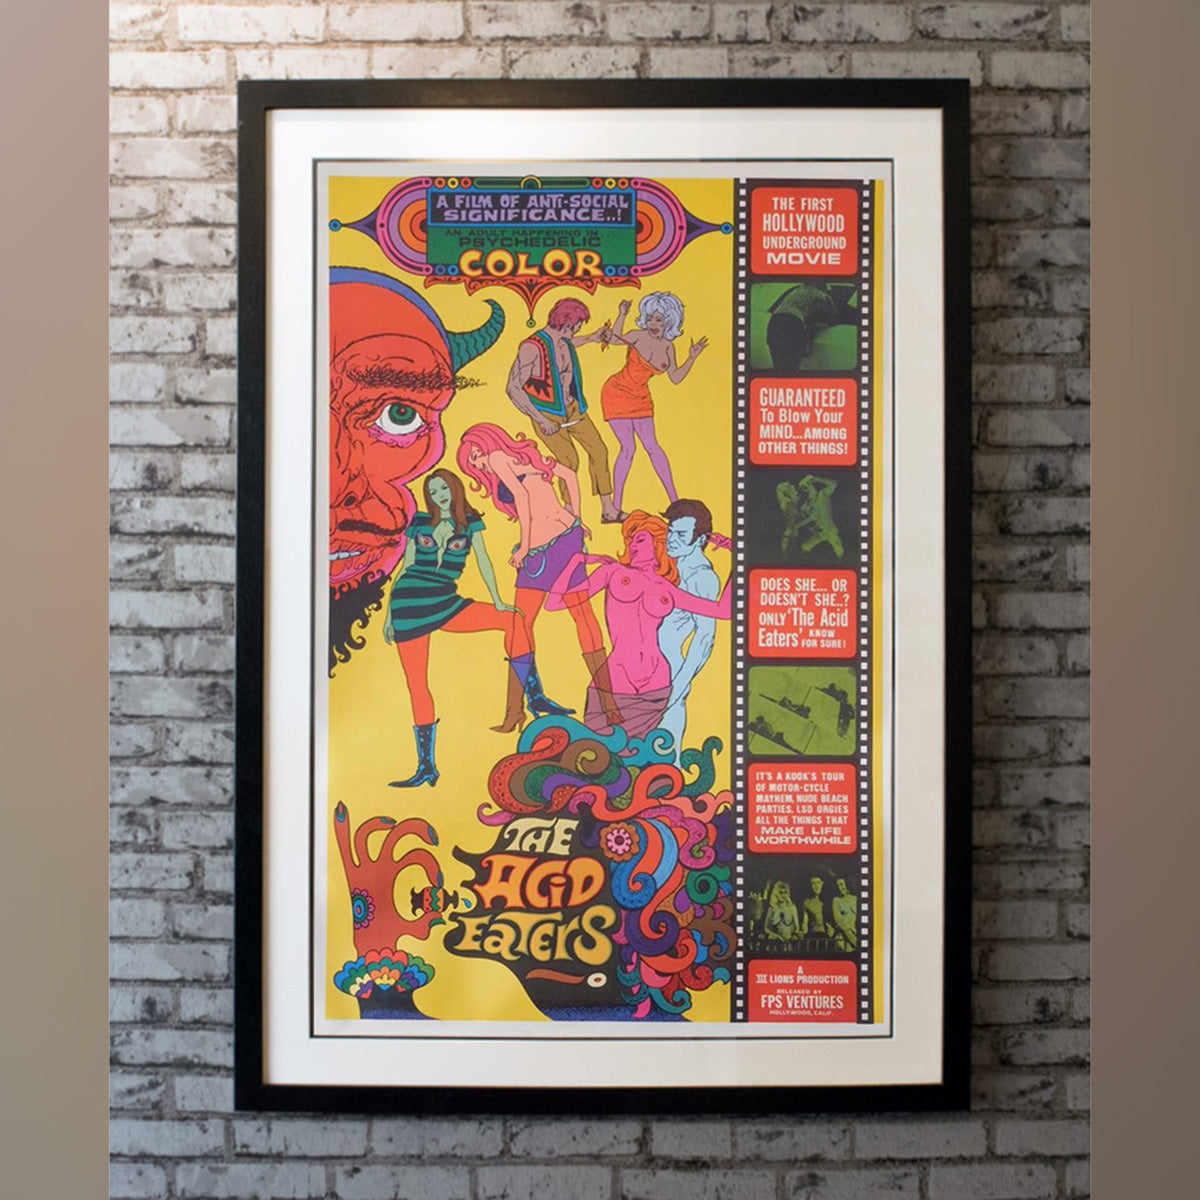 Original Movie Poster of Acid Eaters, The (1968)